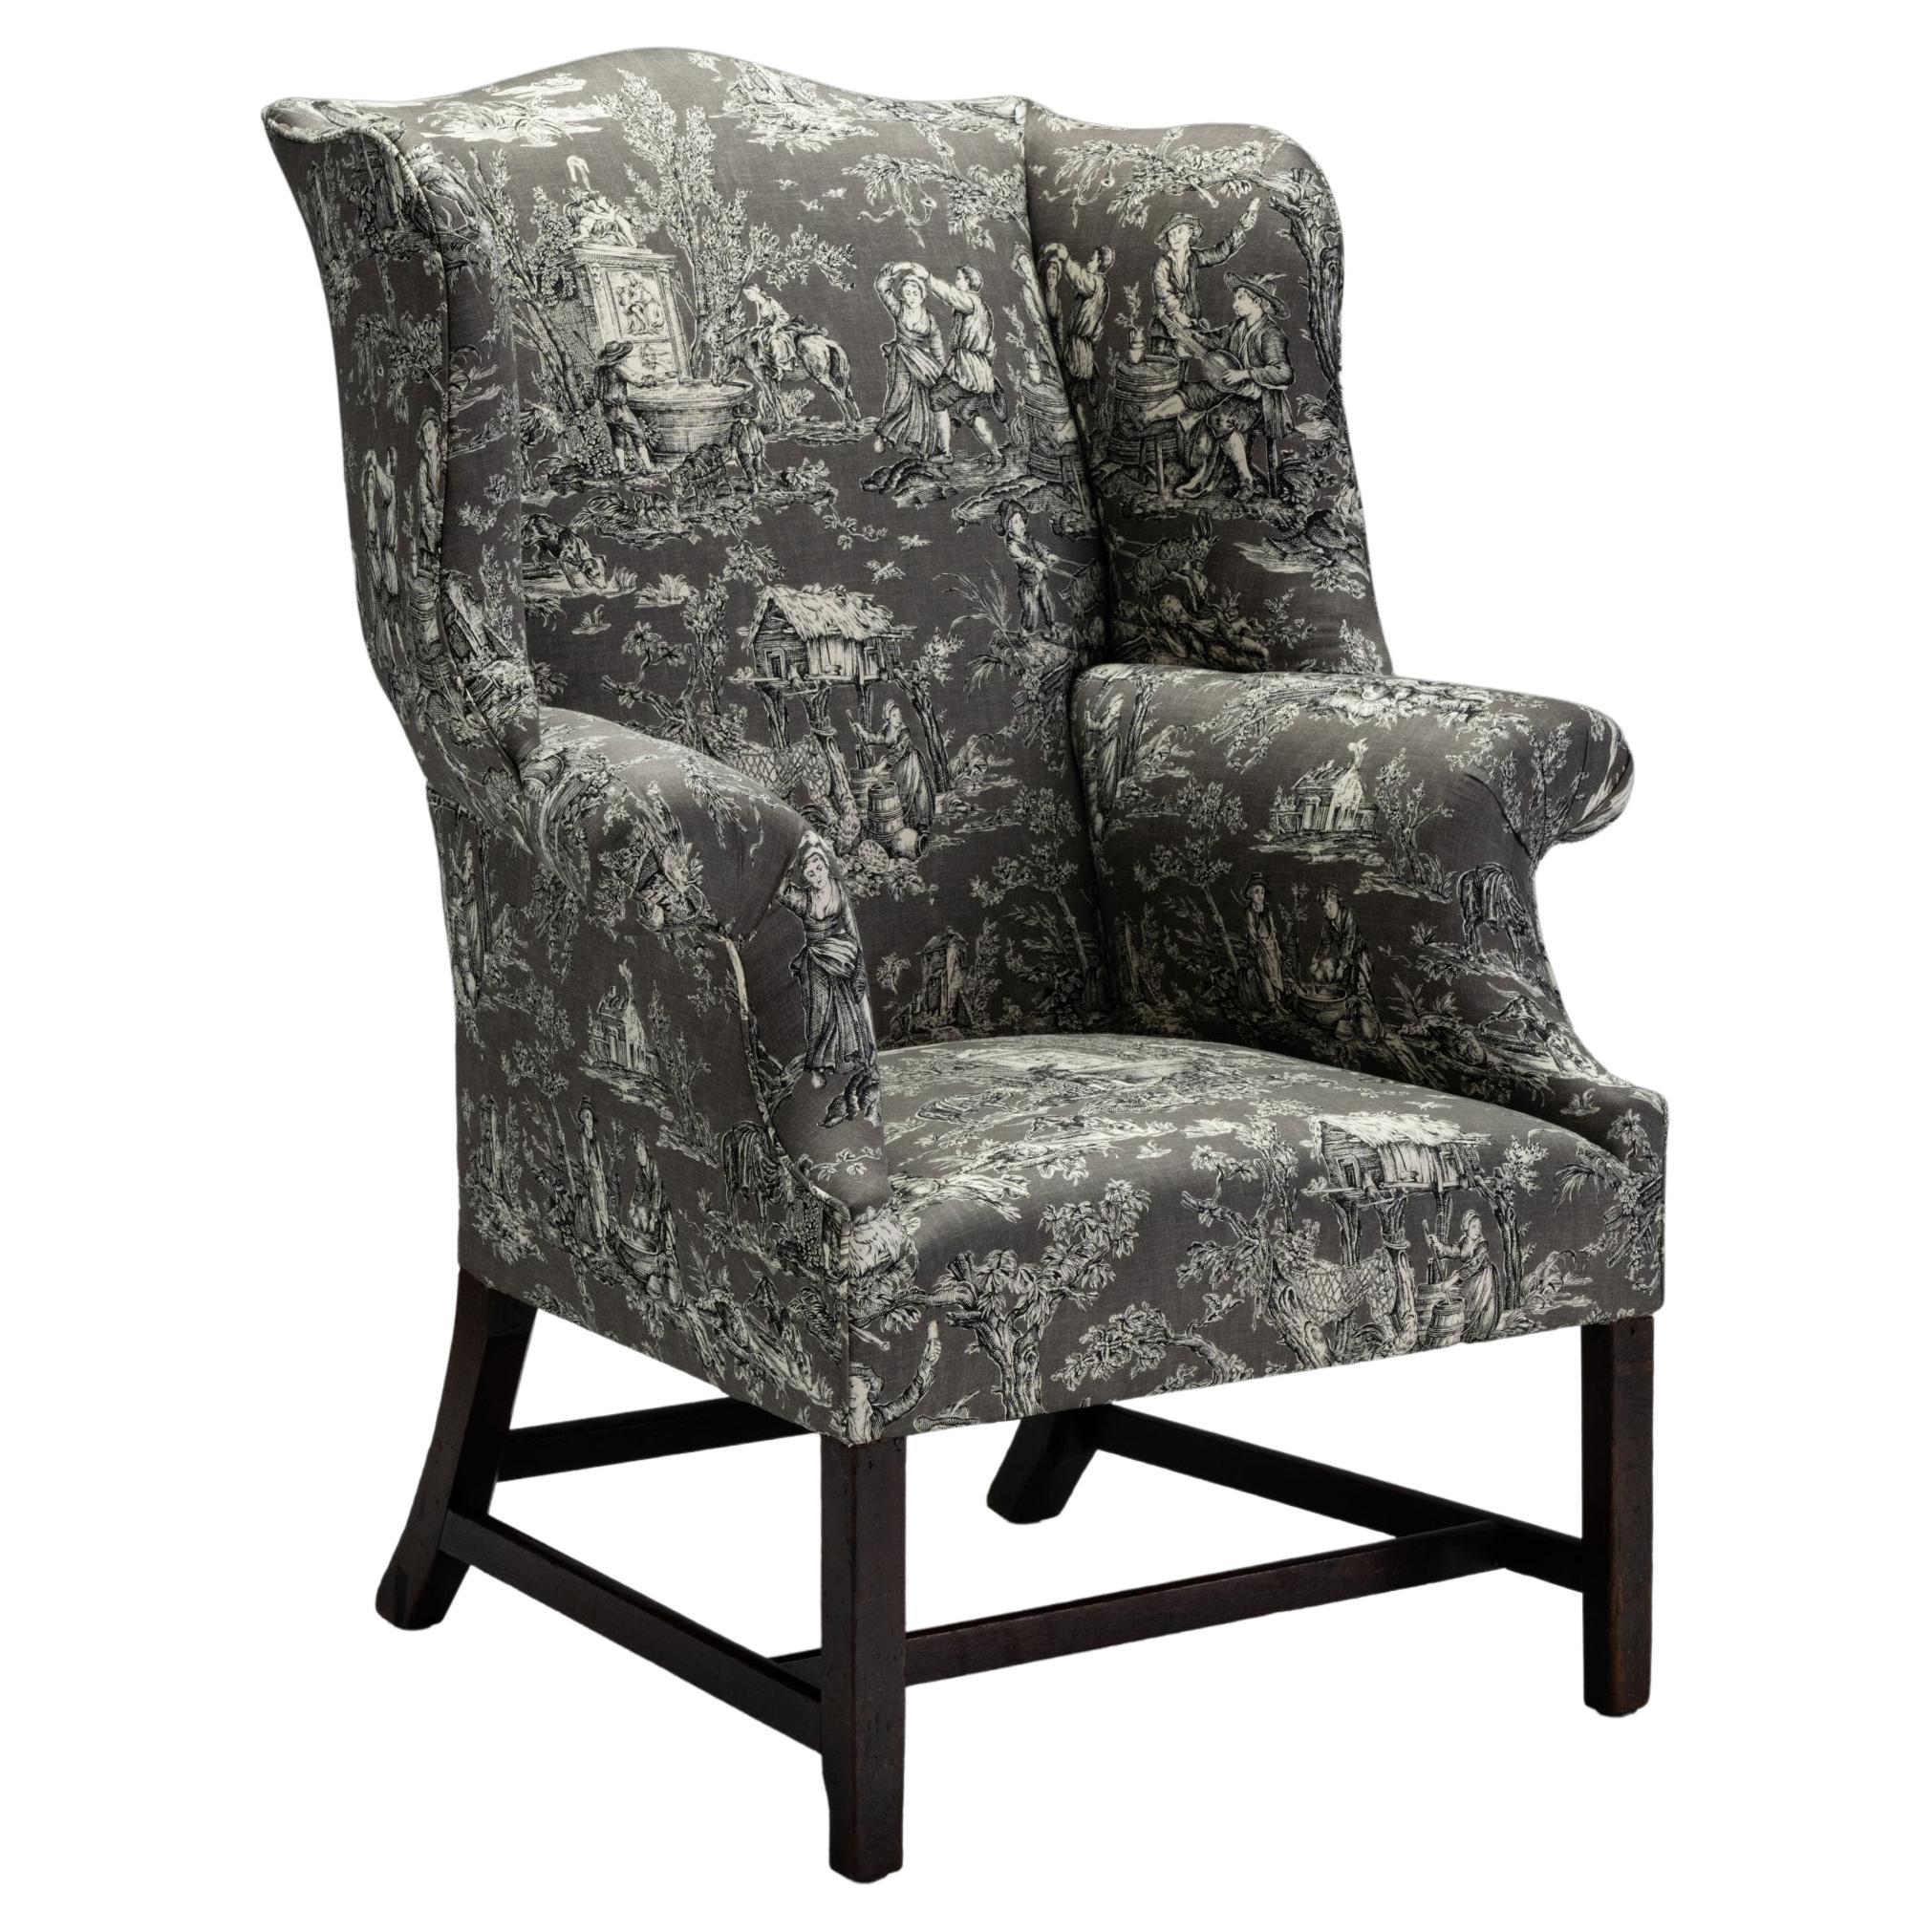 Georgian Wing Chair in 100% Cotton Toile Fabric from Pierre Frey